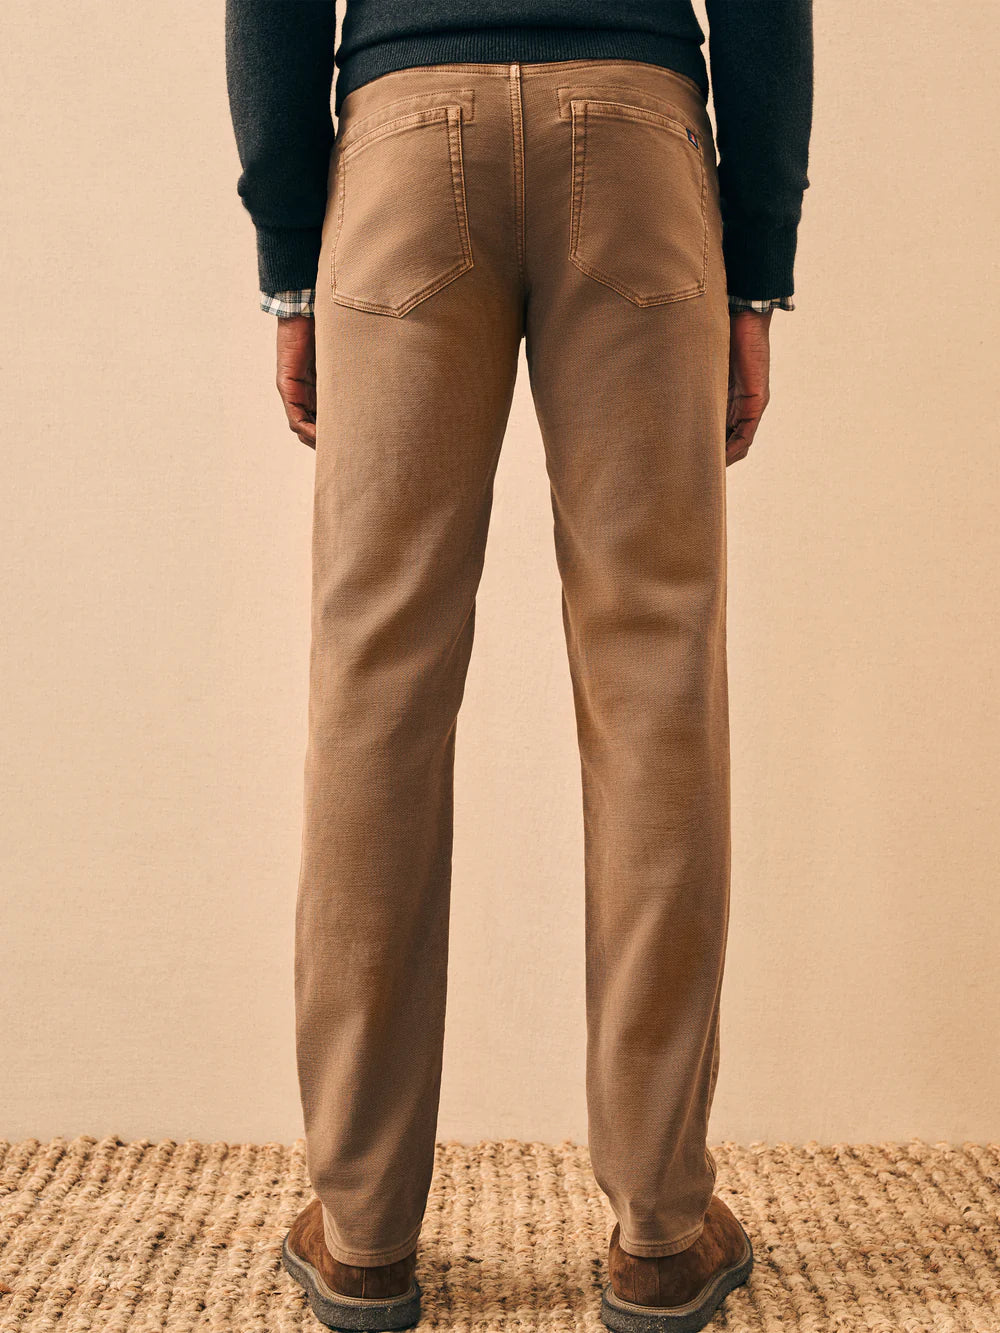 Stretch Terry 5-Pocket Pant